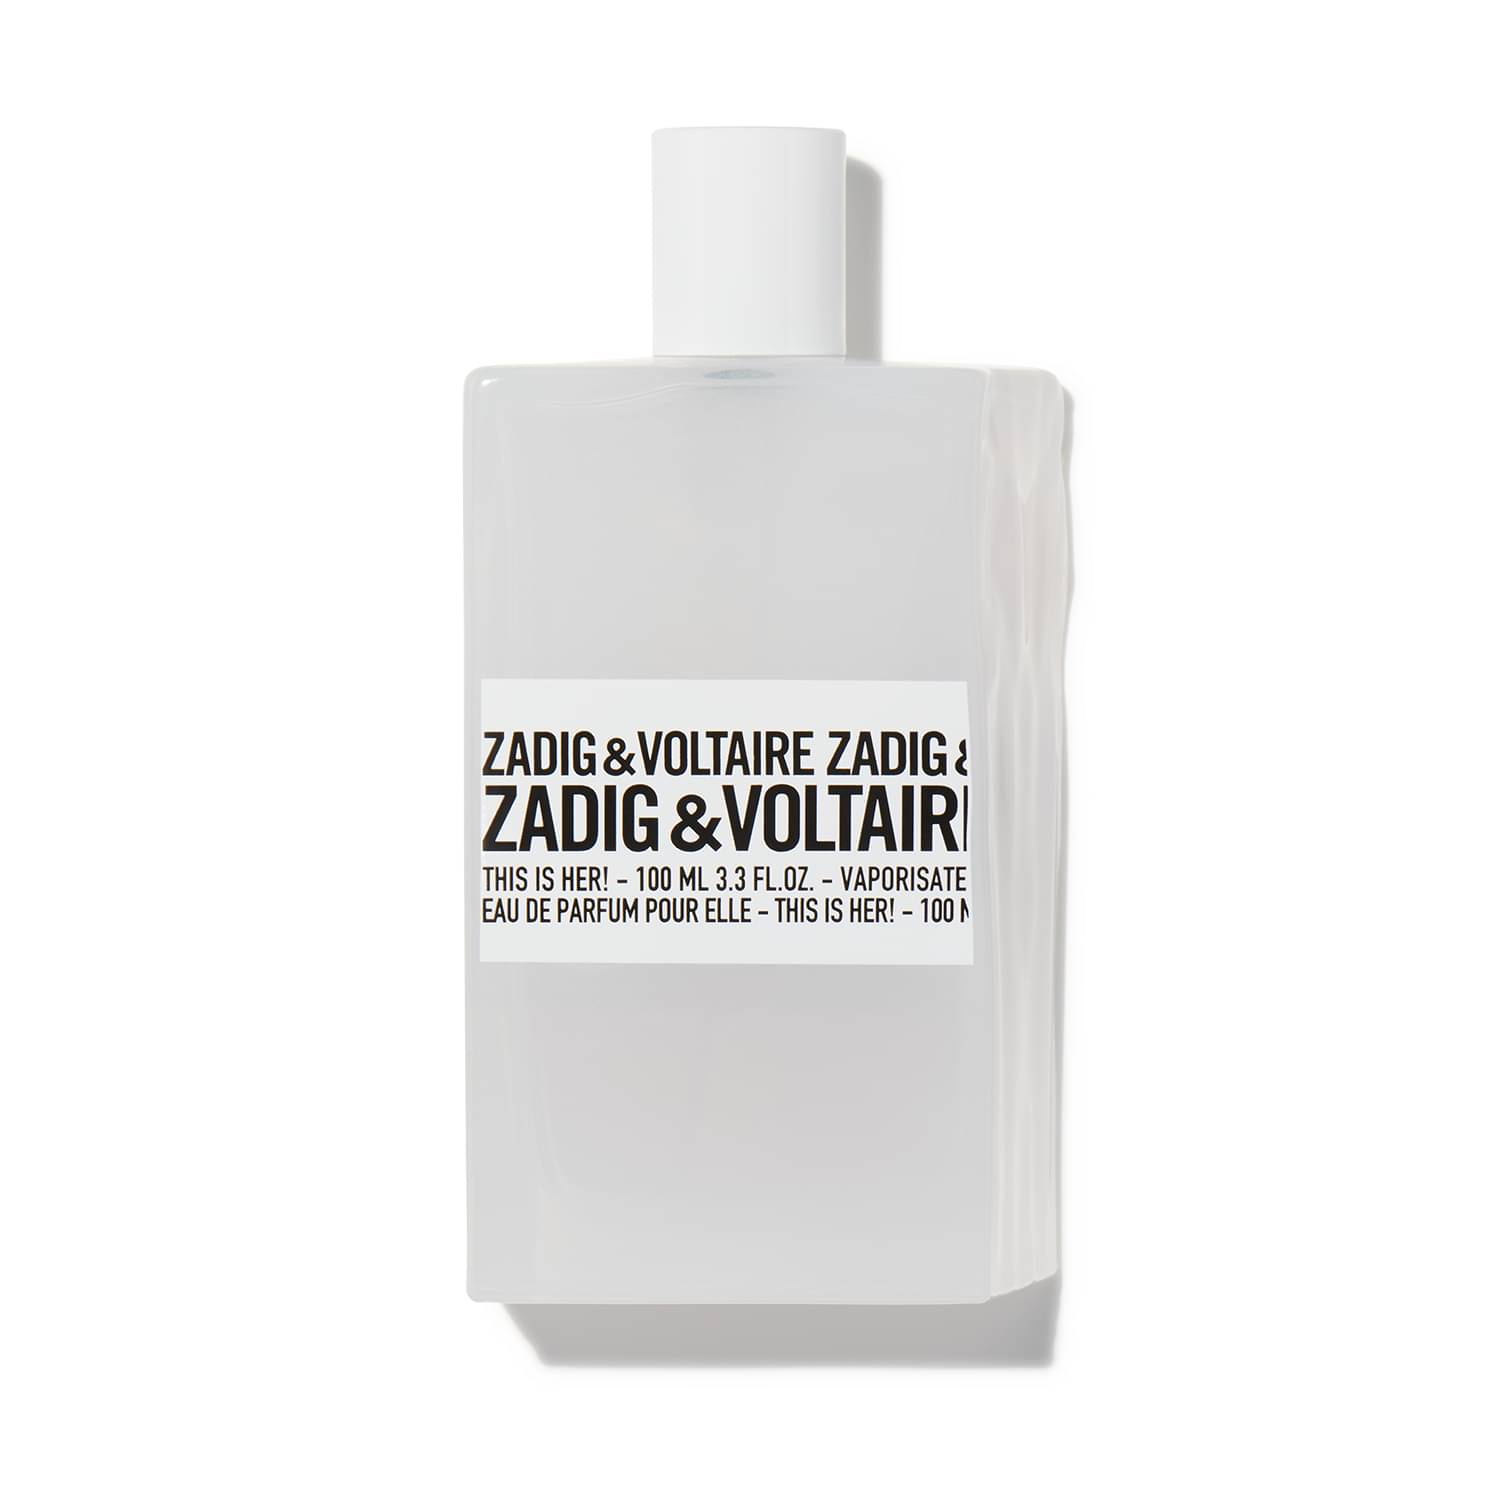 Buy Zadig & Voltaire This Is Her! at Scentbird for $16.95